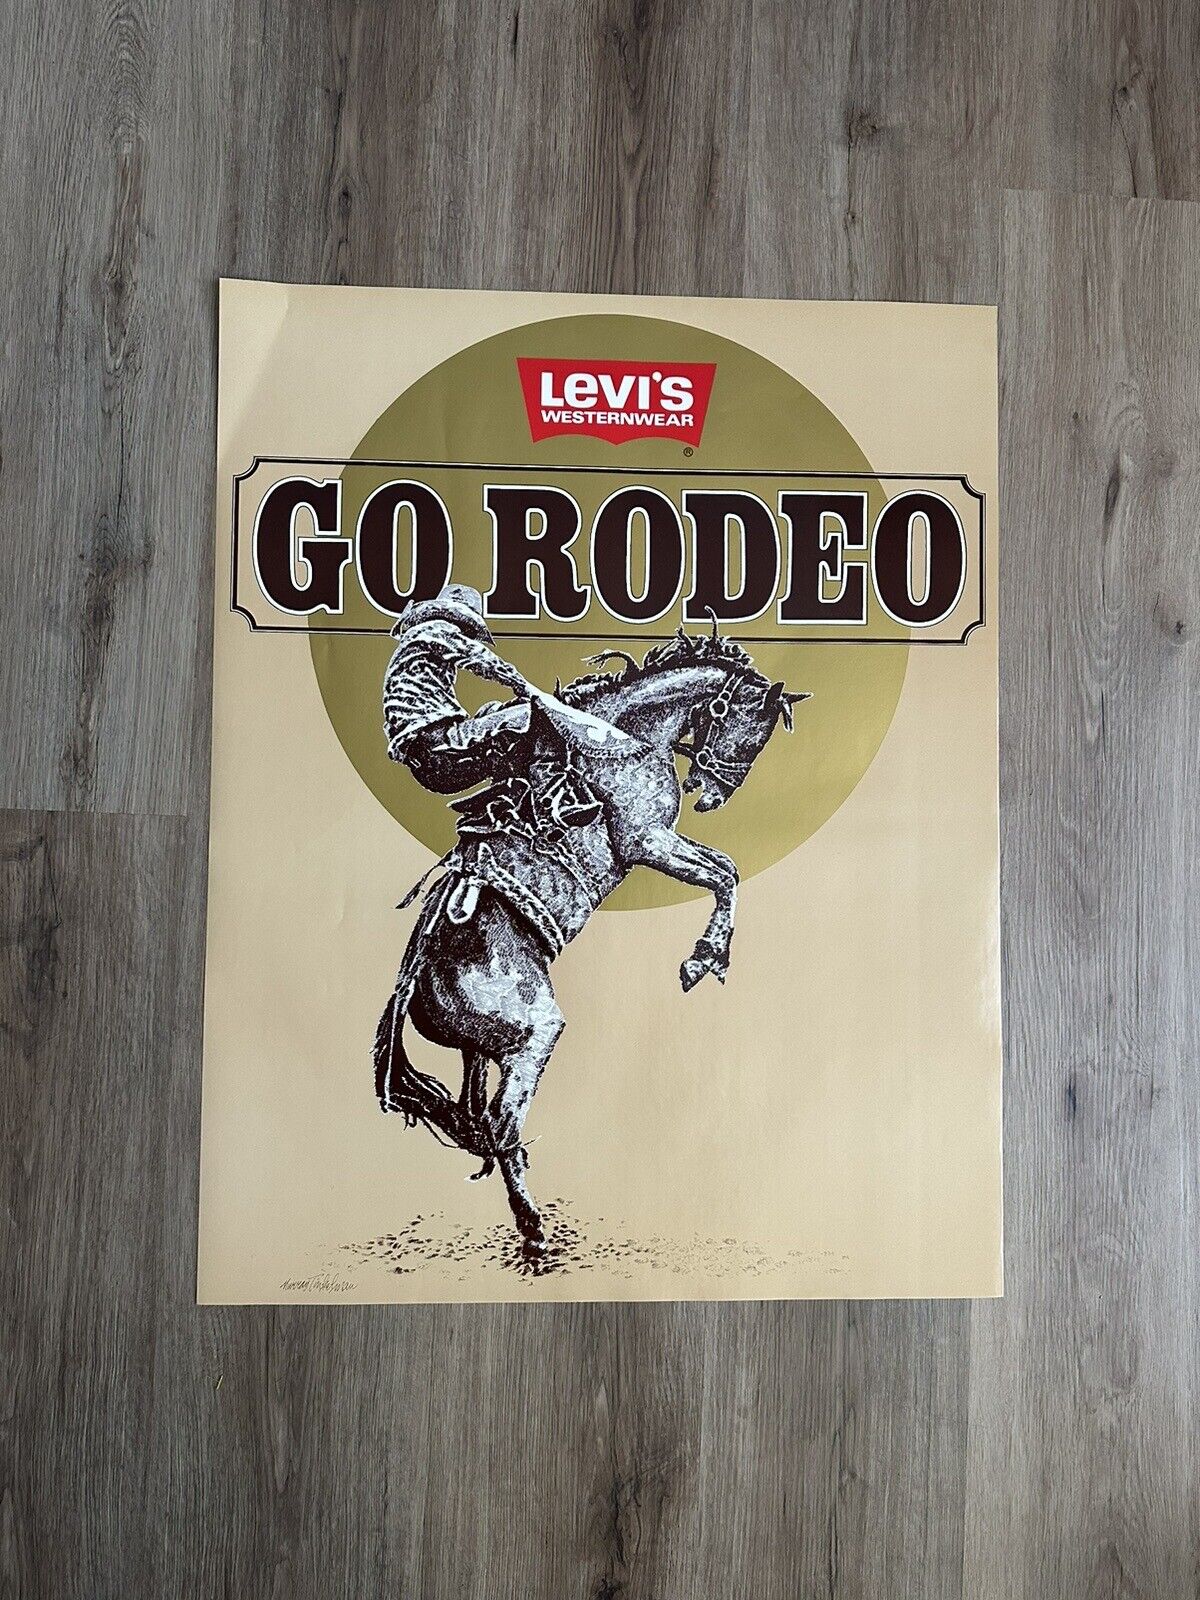 Vintage 1983 Levi’s Western Wear Go Rodeo Cowboy Advertising Poster 21x27